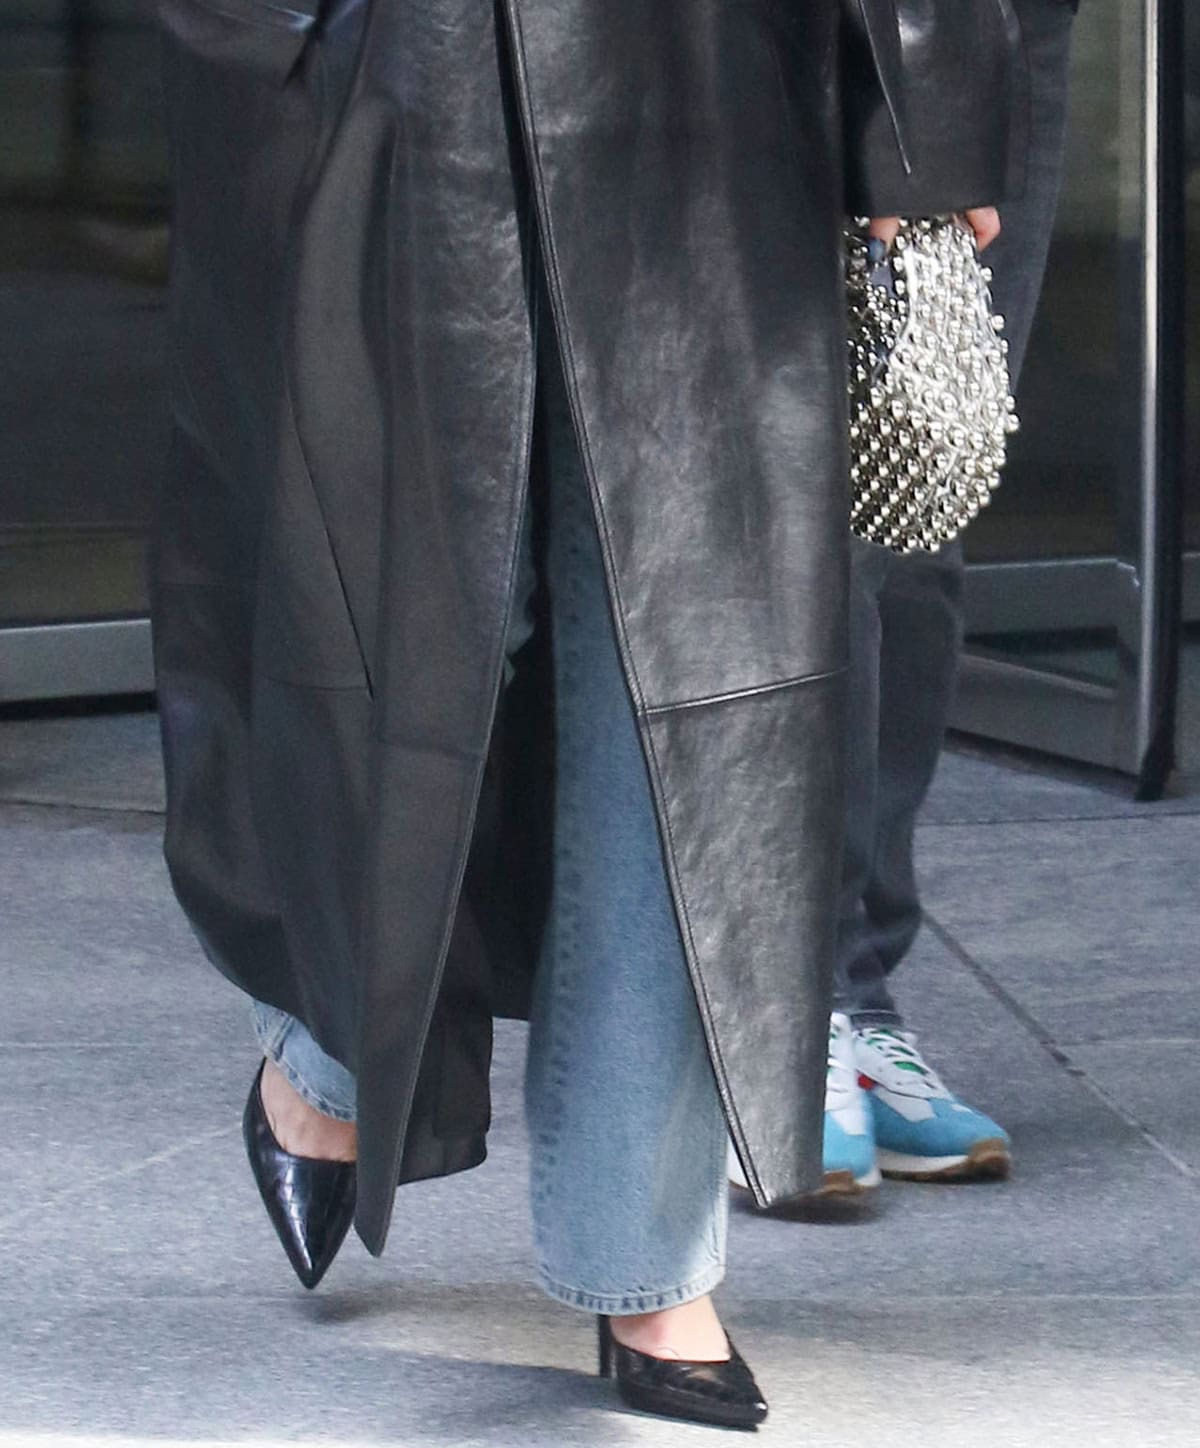 Dua Lipa elevates her casual 'fit with black croc pumps and a silver studded purse